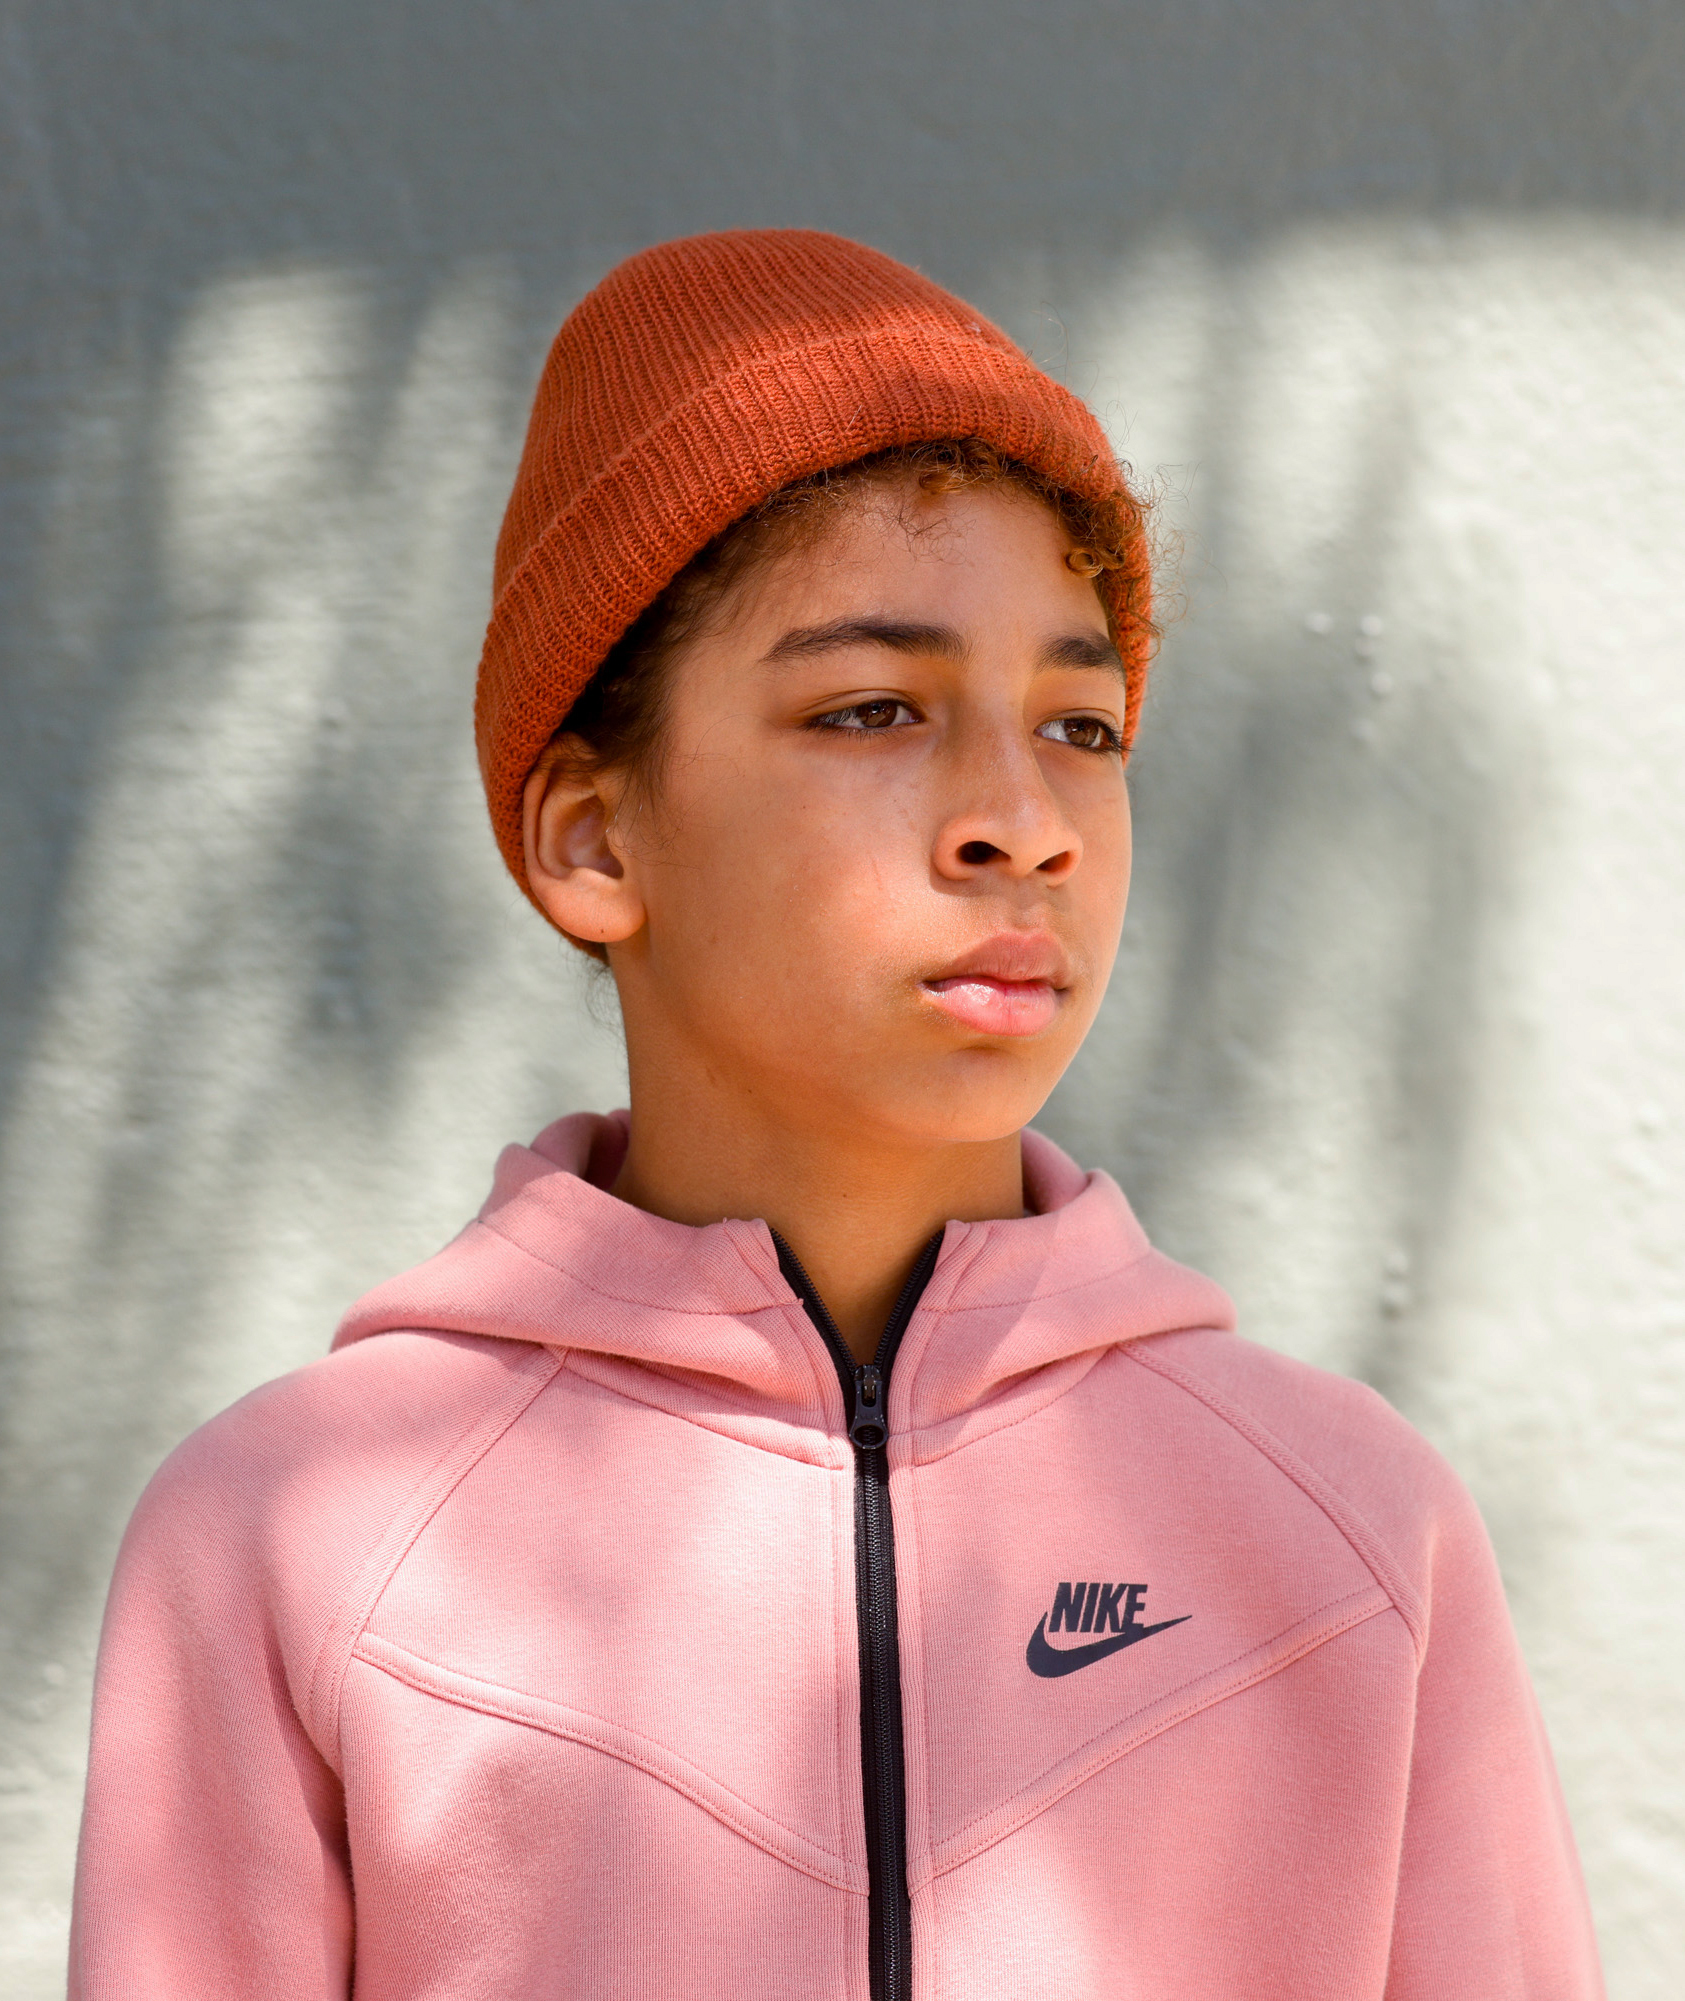 A young person wearing a pink jacket and an orange beanie stands in front of a grey wall, looking to the side.